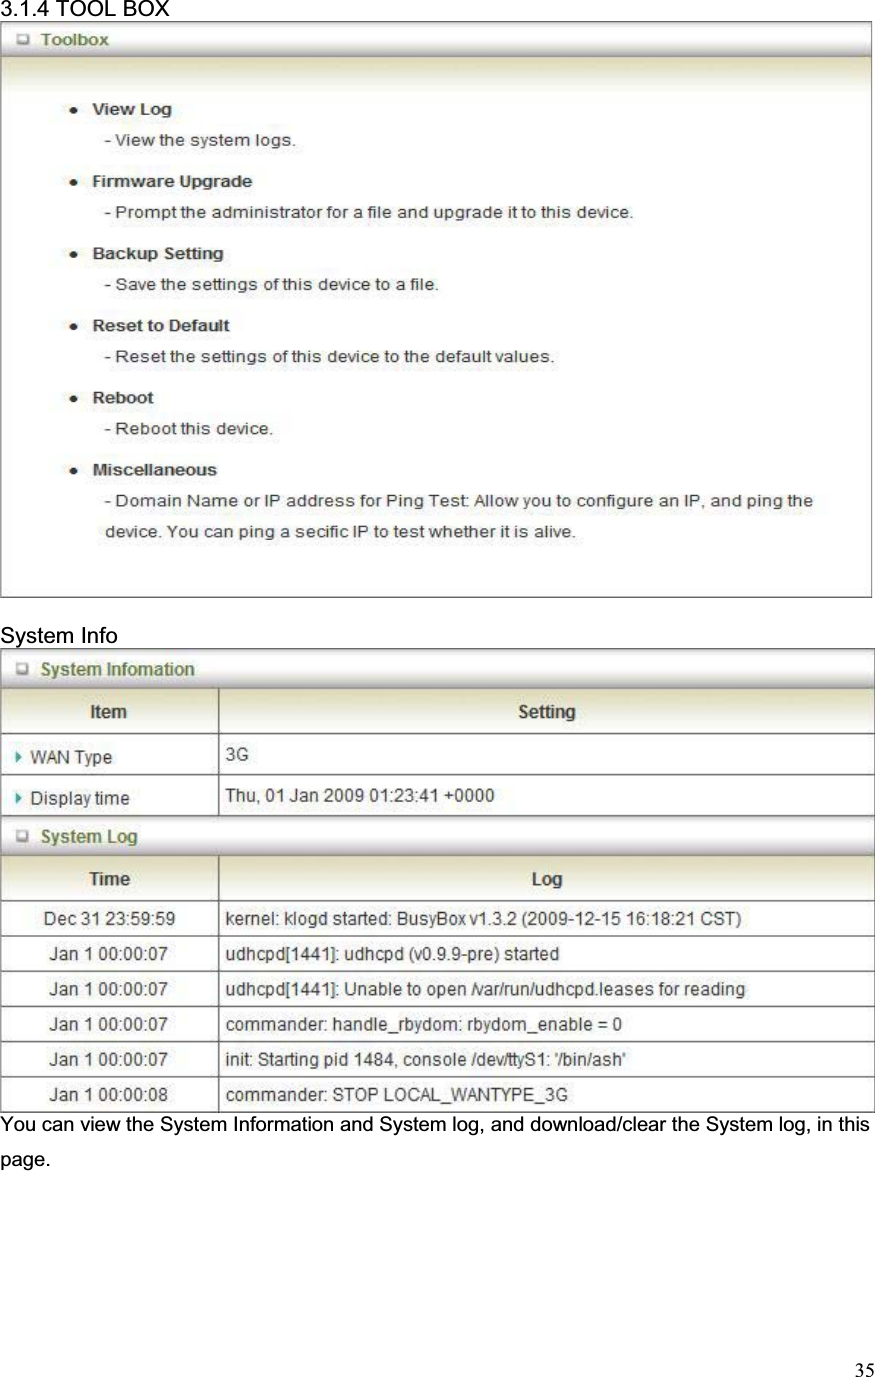 353.1.4 TOOL BOX System Info You can view the System Information and System log, and download/clear the System log, in this page. 